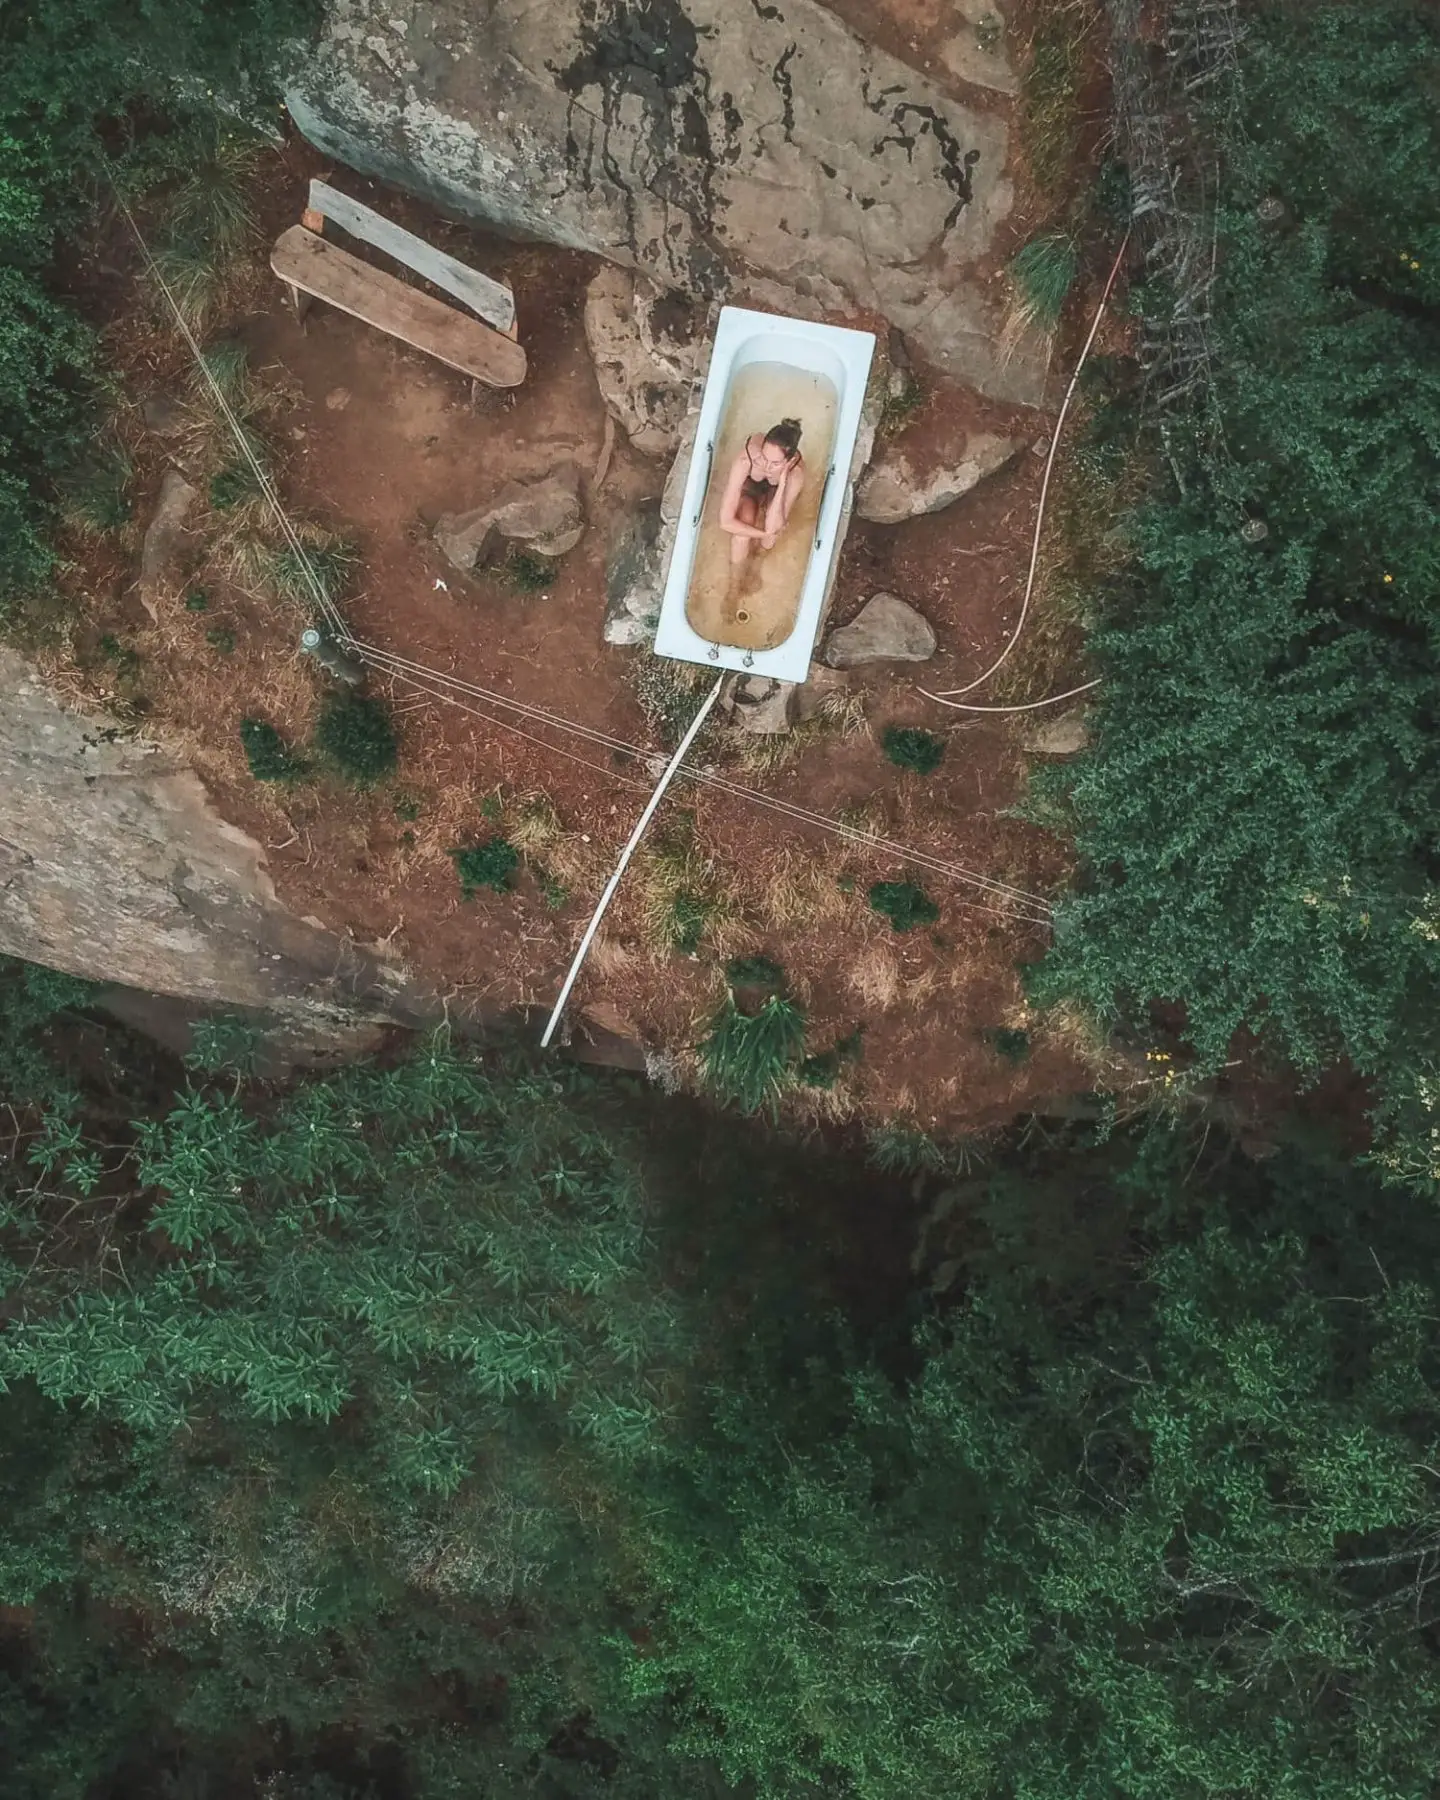 girl in bathtub in the middle of the forest